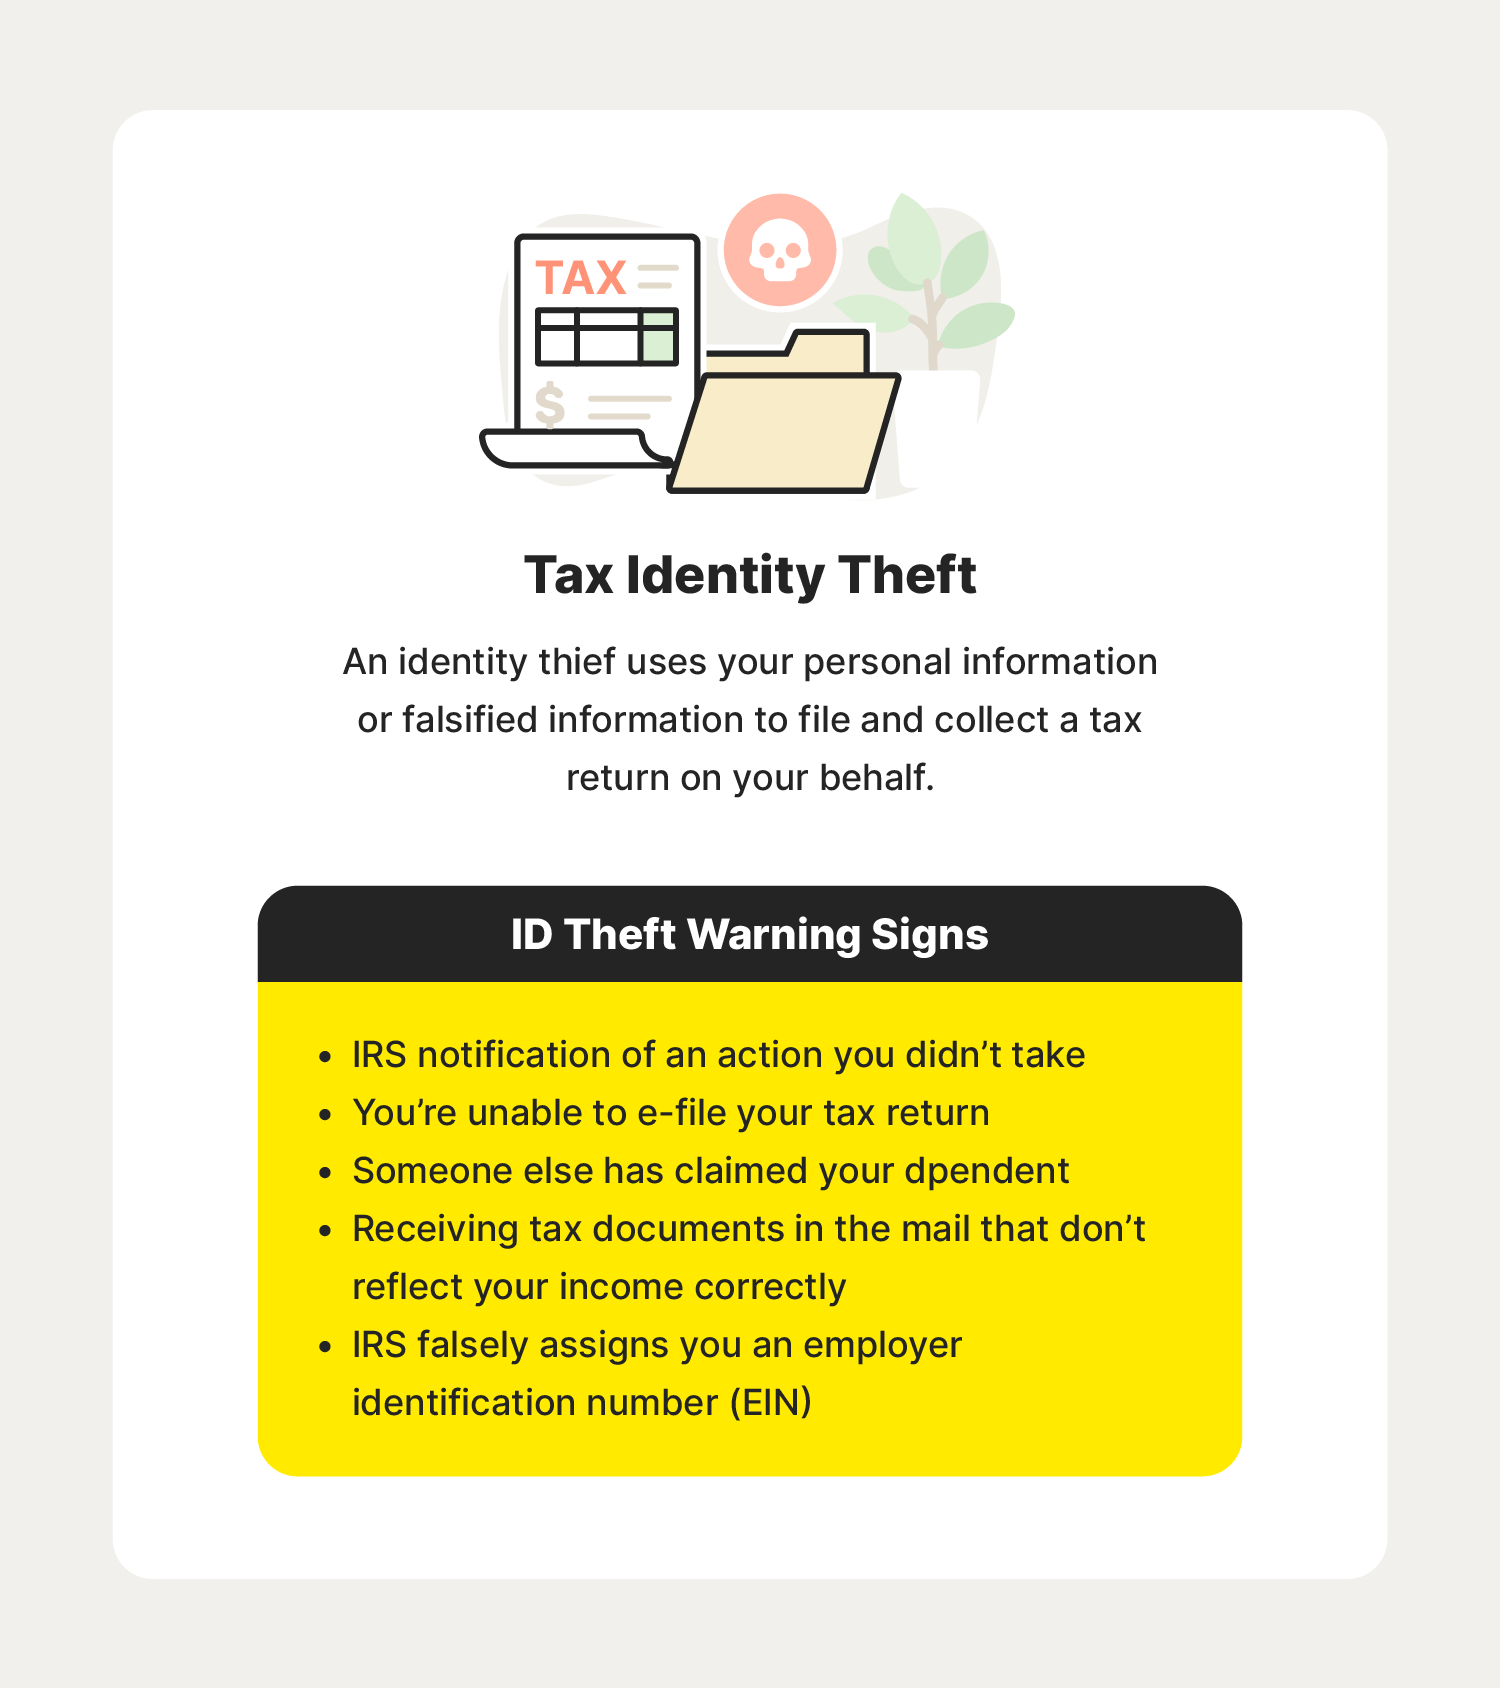 A graphic describes tax identity theft, a type of identity theft to keep an eye on when learning how to avoid identity theft.